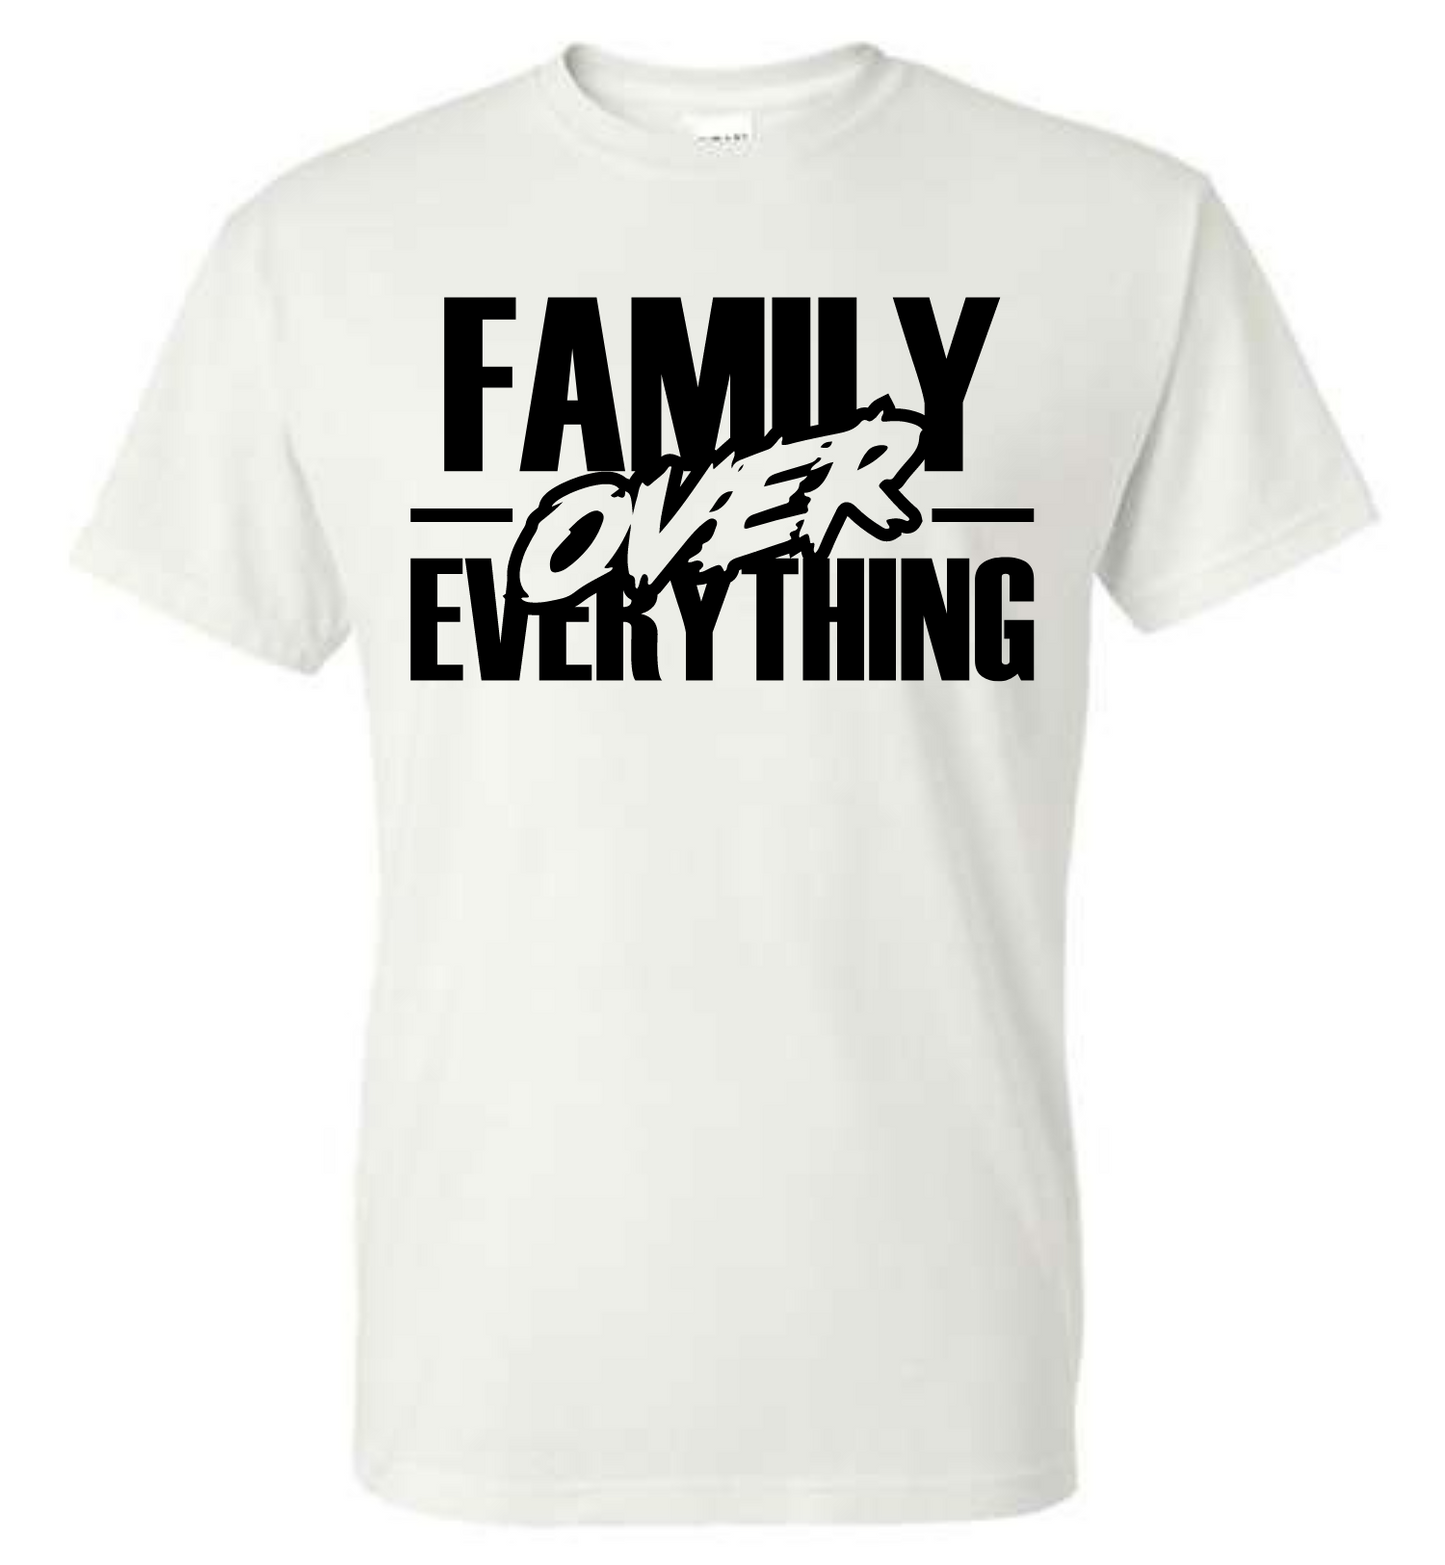 Family Over Everything Shirt, Family BBQ, Reunion, Travel Shirt, Group Family Shirt (ADULTS)